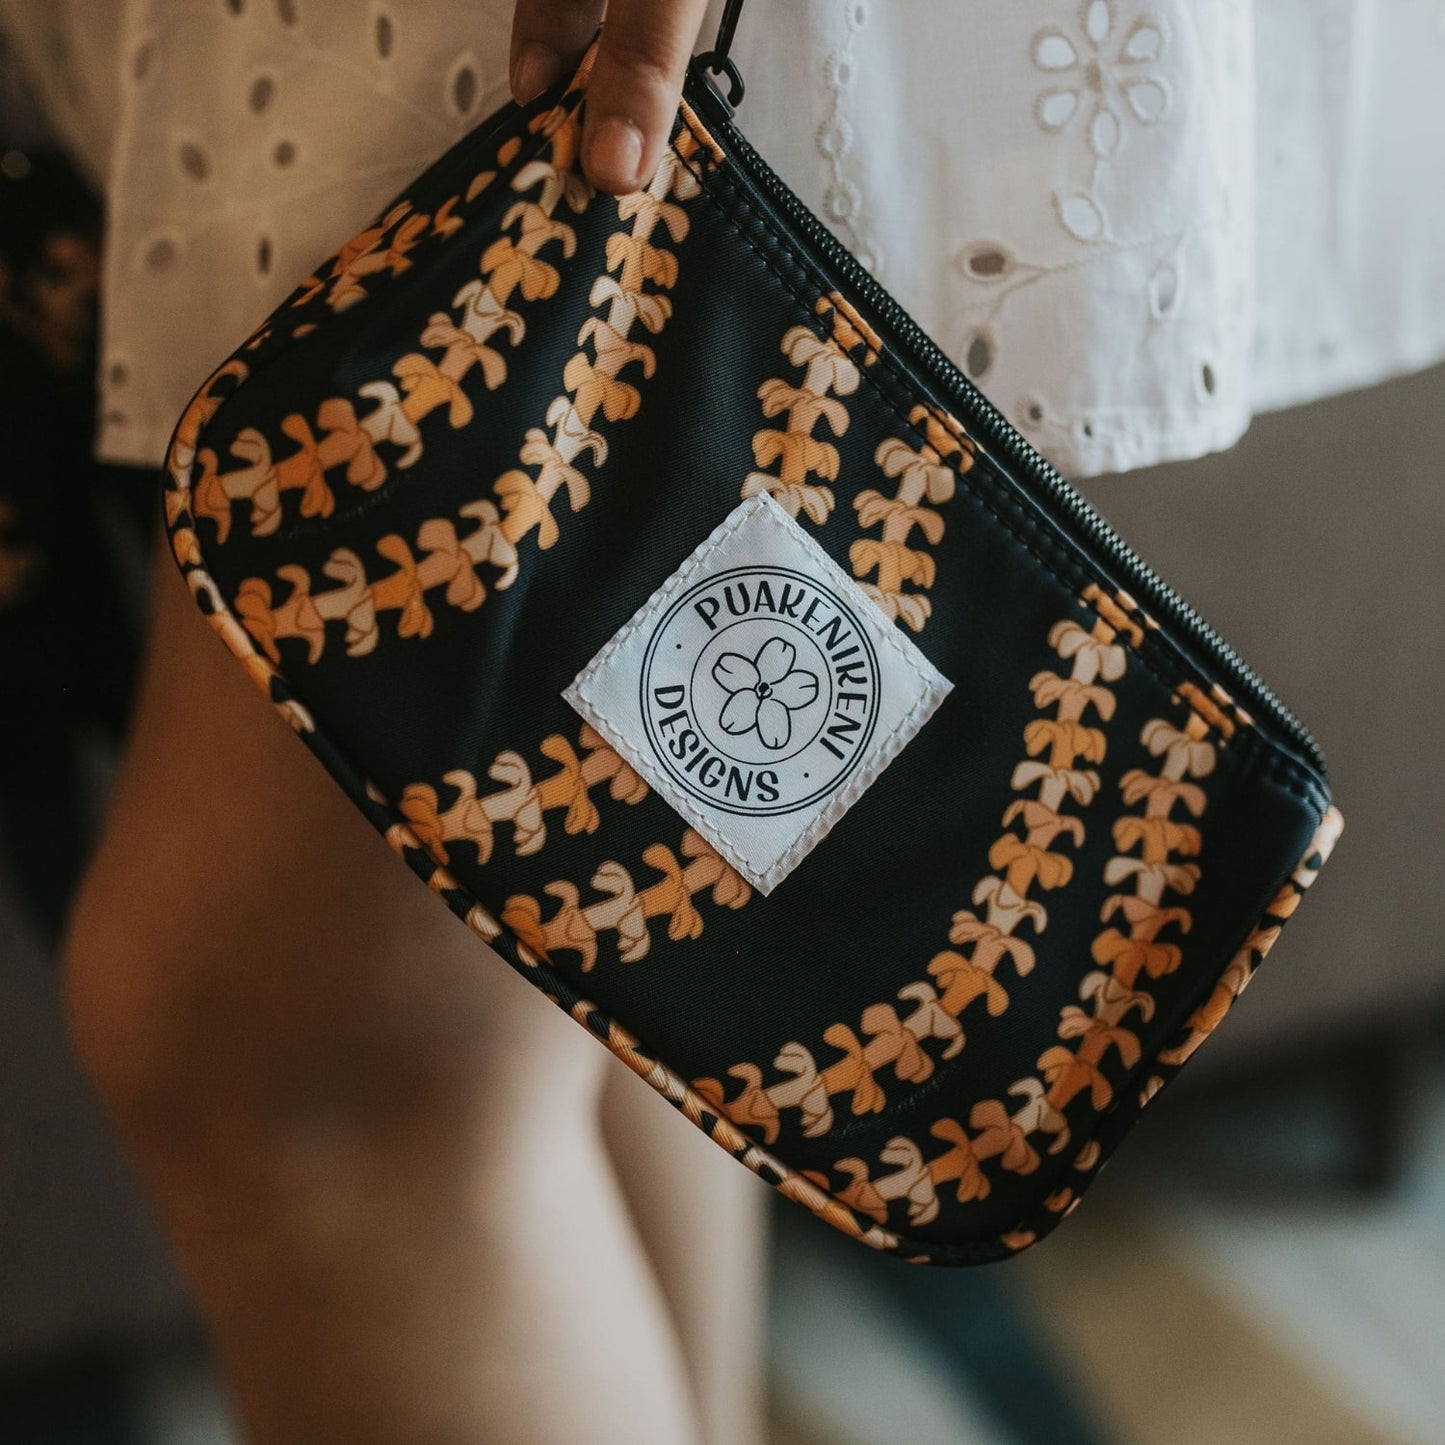 grab and go set includes mini zipper pouch and wristlet key fob in kaulua black orange lei - from Puakenikeni Designs - model holding on the side